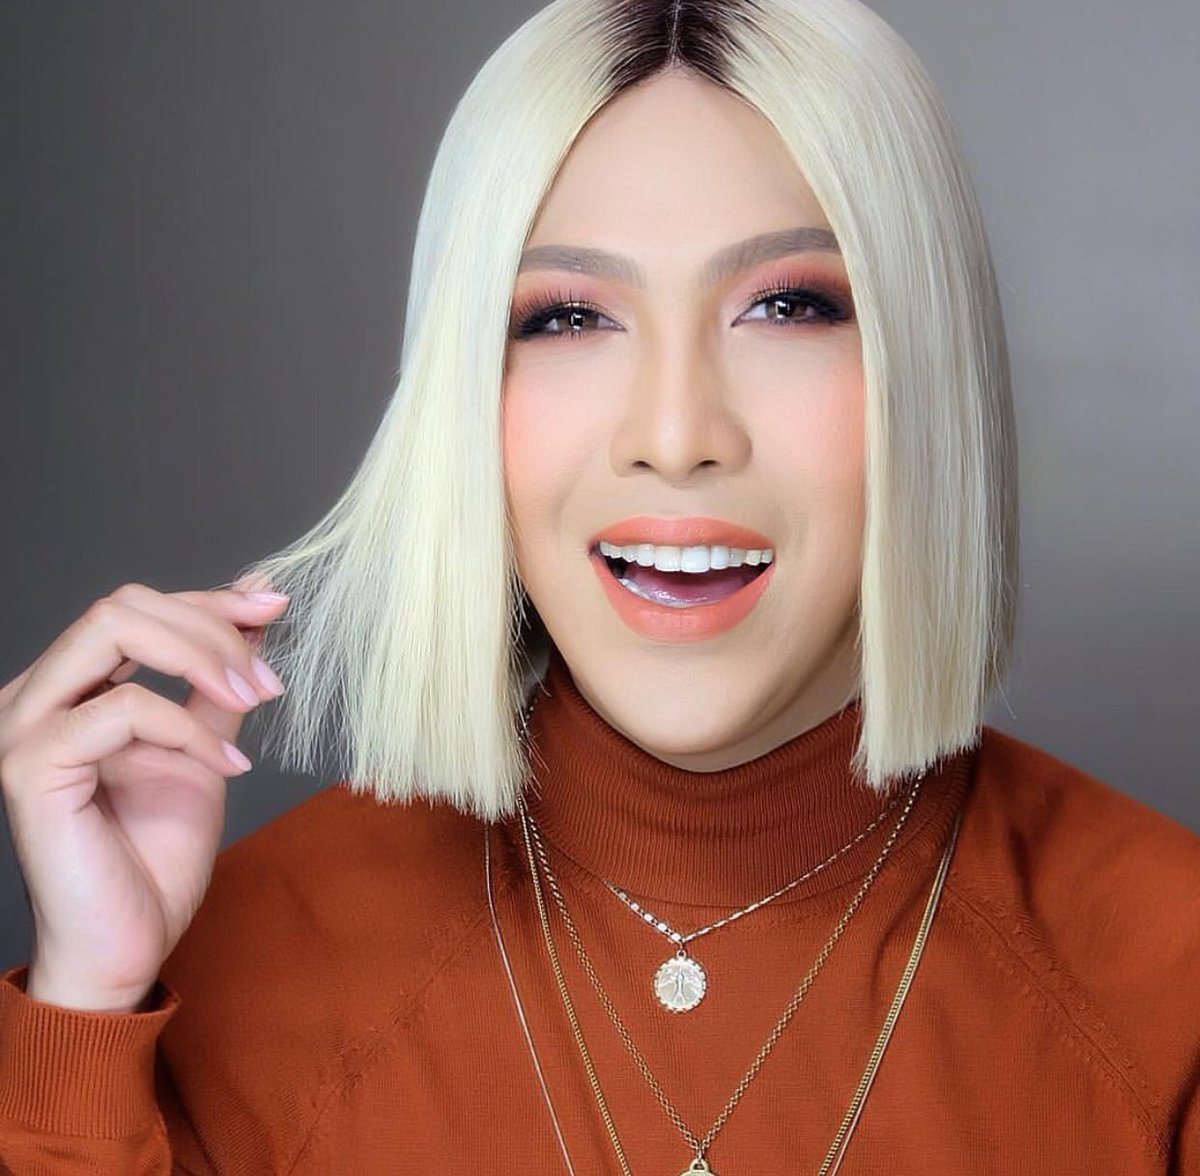 Vice Ganda's funny explanation for recognizing Jhong's outfit